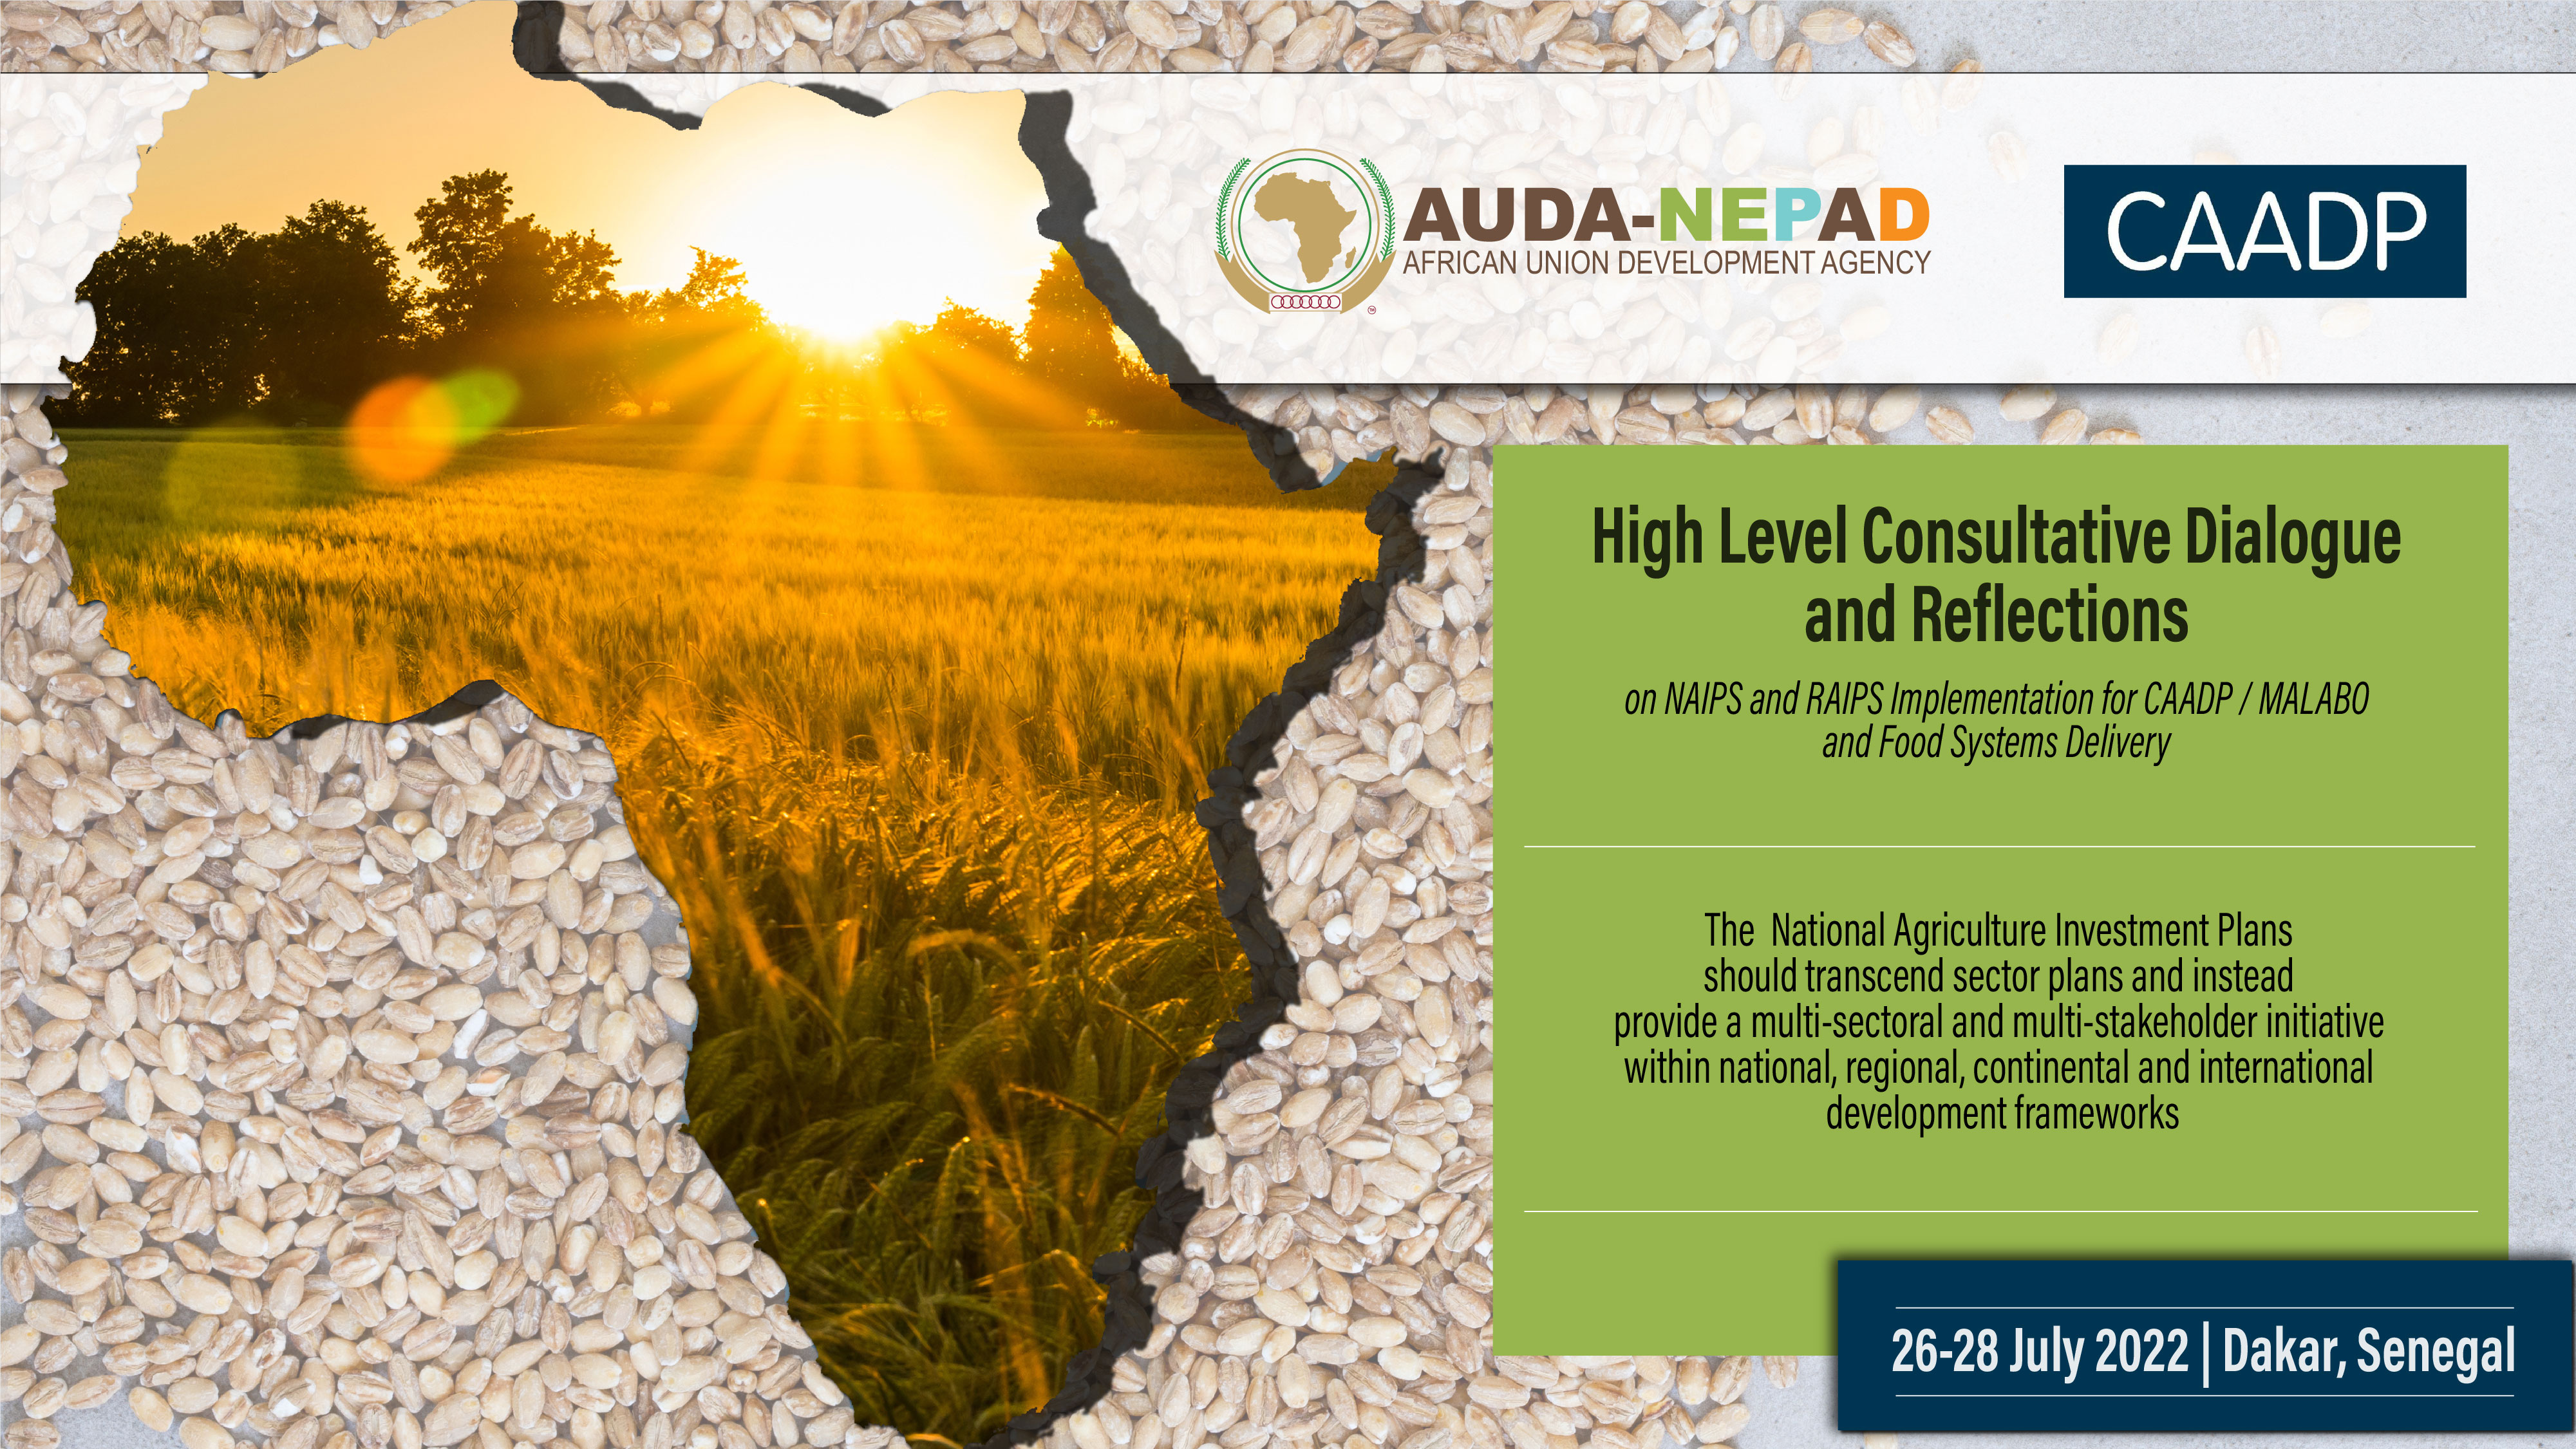 CAADP Key Messages 5